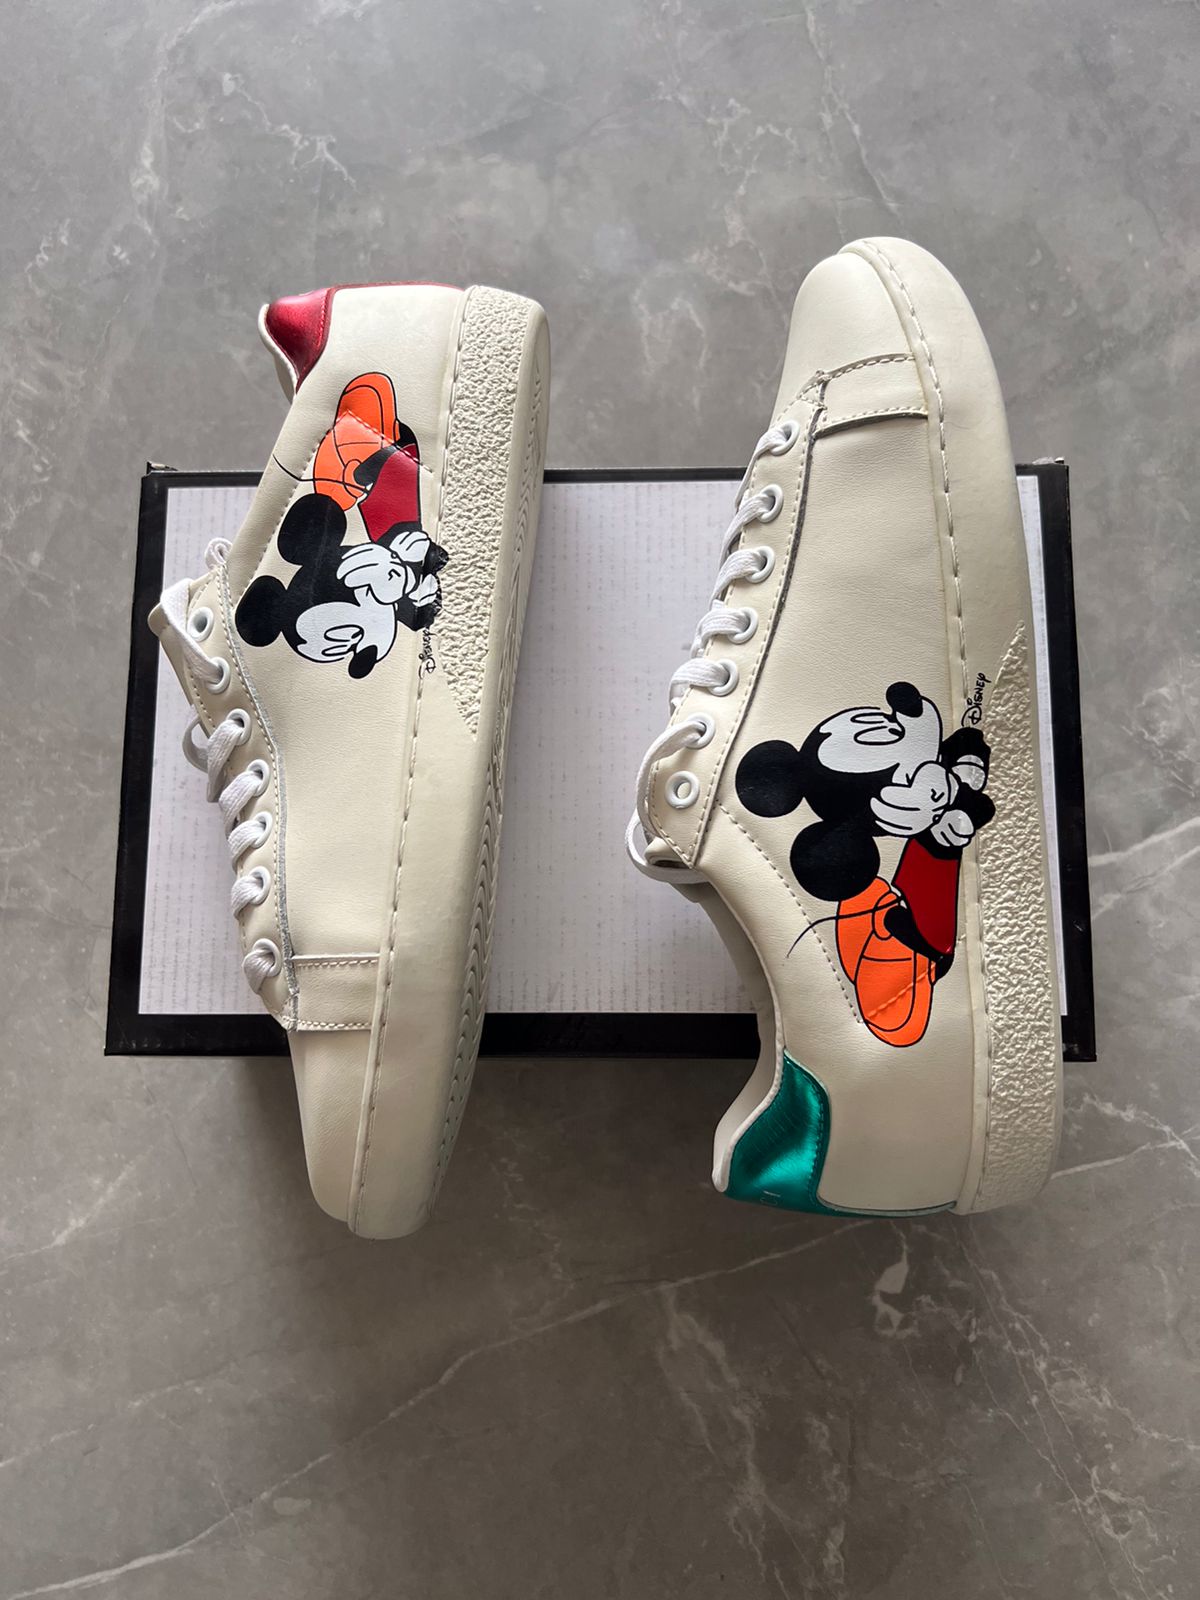 Disney X Ace Low Sneakers - Get Yours Now!